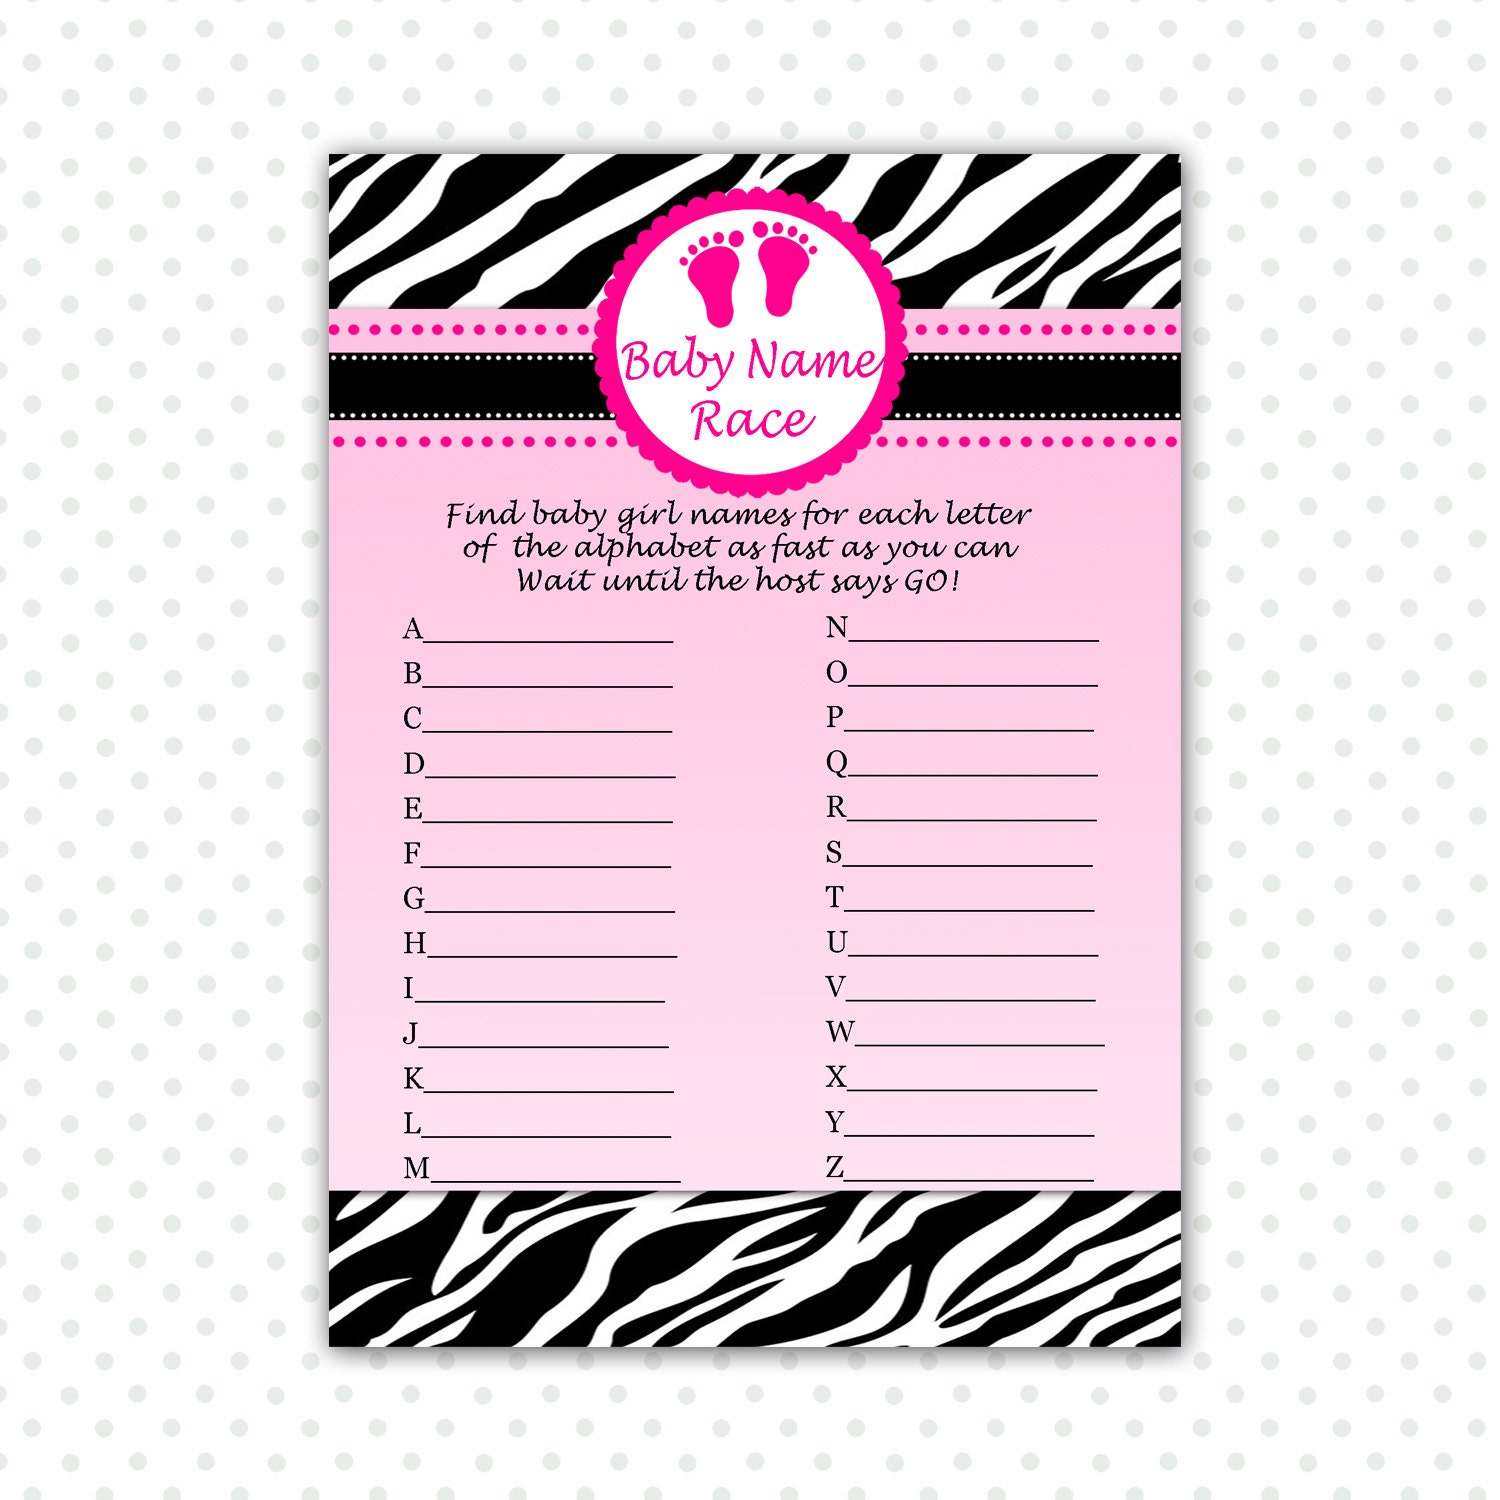 INSTANT DOWNLOAD - Pink Zebra Baby Shower Name Race Cards - Baby Feet Jungle Safari Baby Shower Games Party Activities Baby Name Race Cards